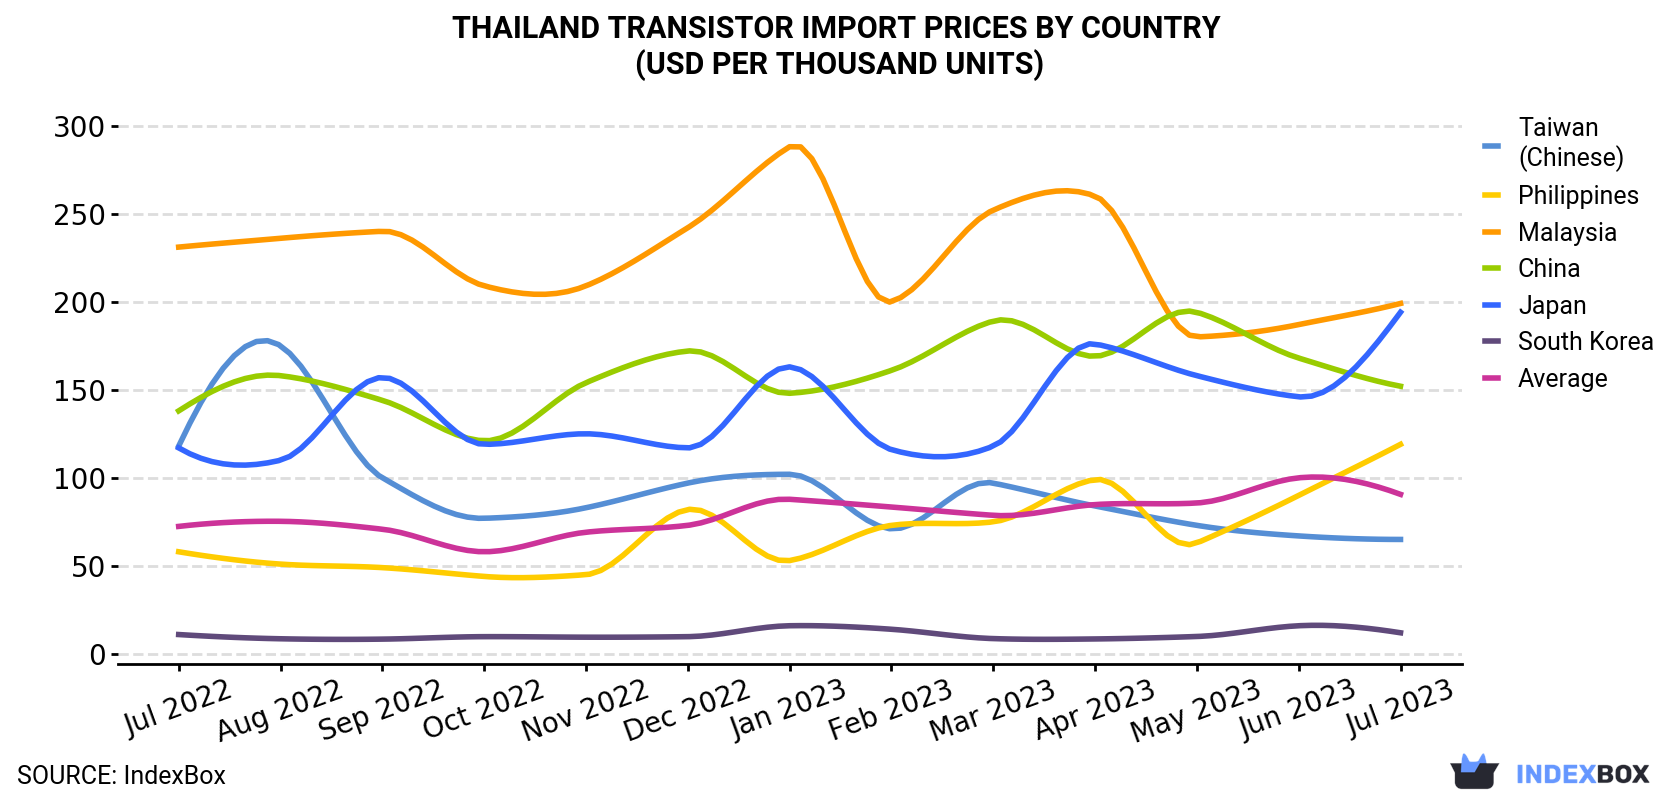 Thailand Transistor Import Prices By Country (USD Per Thousand Units)